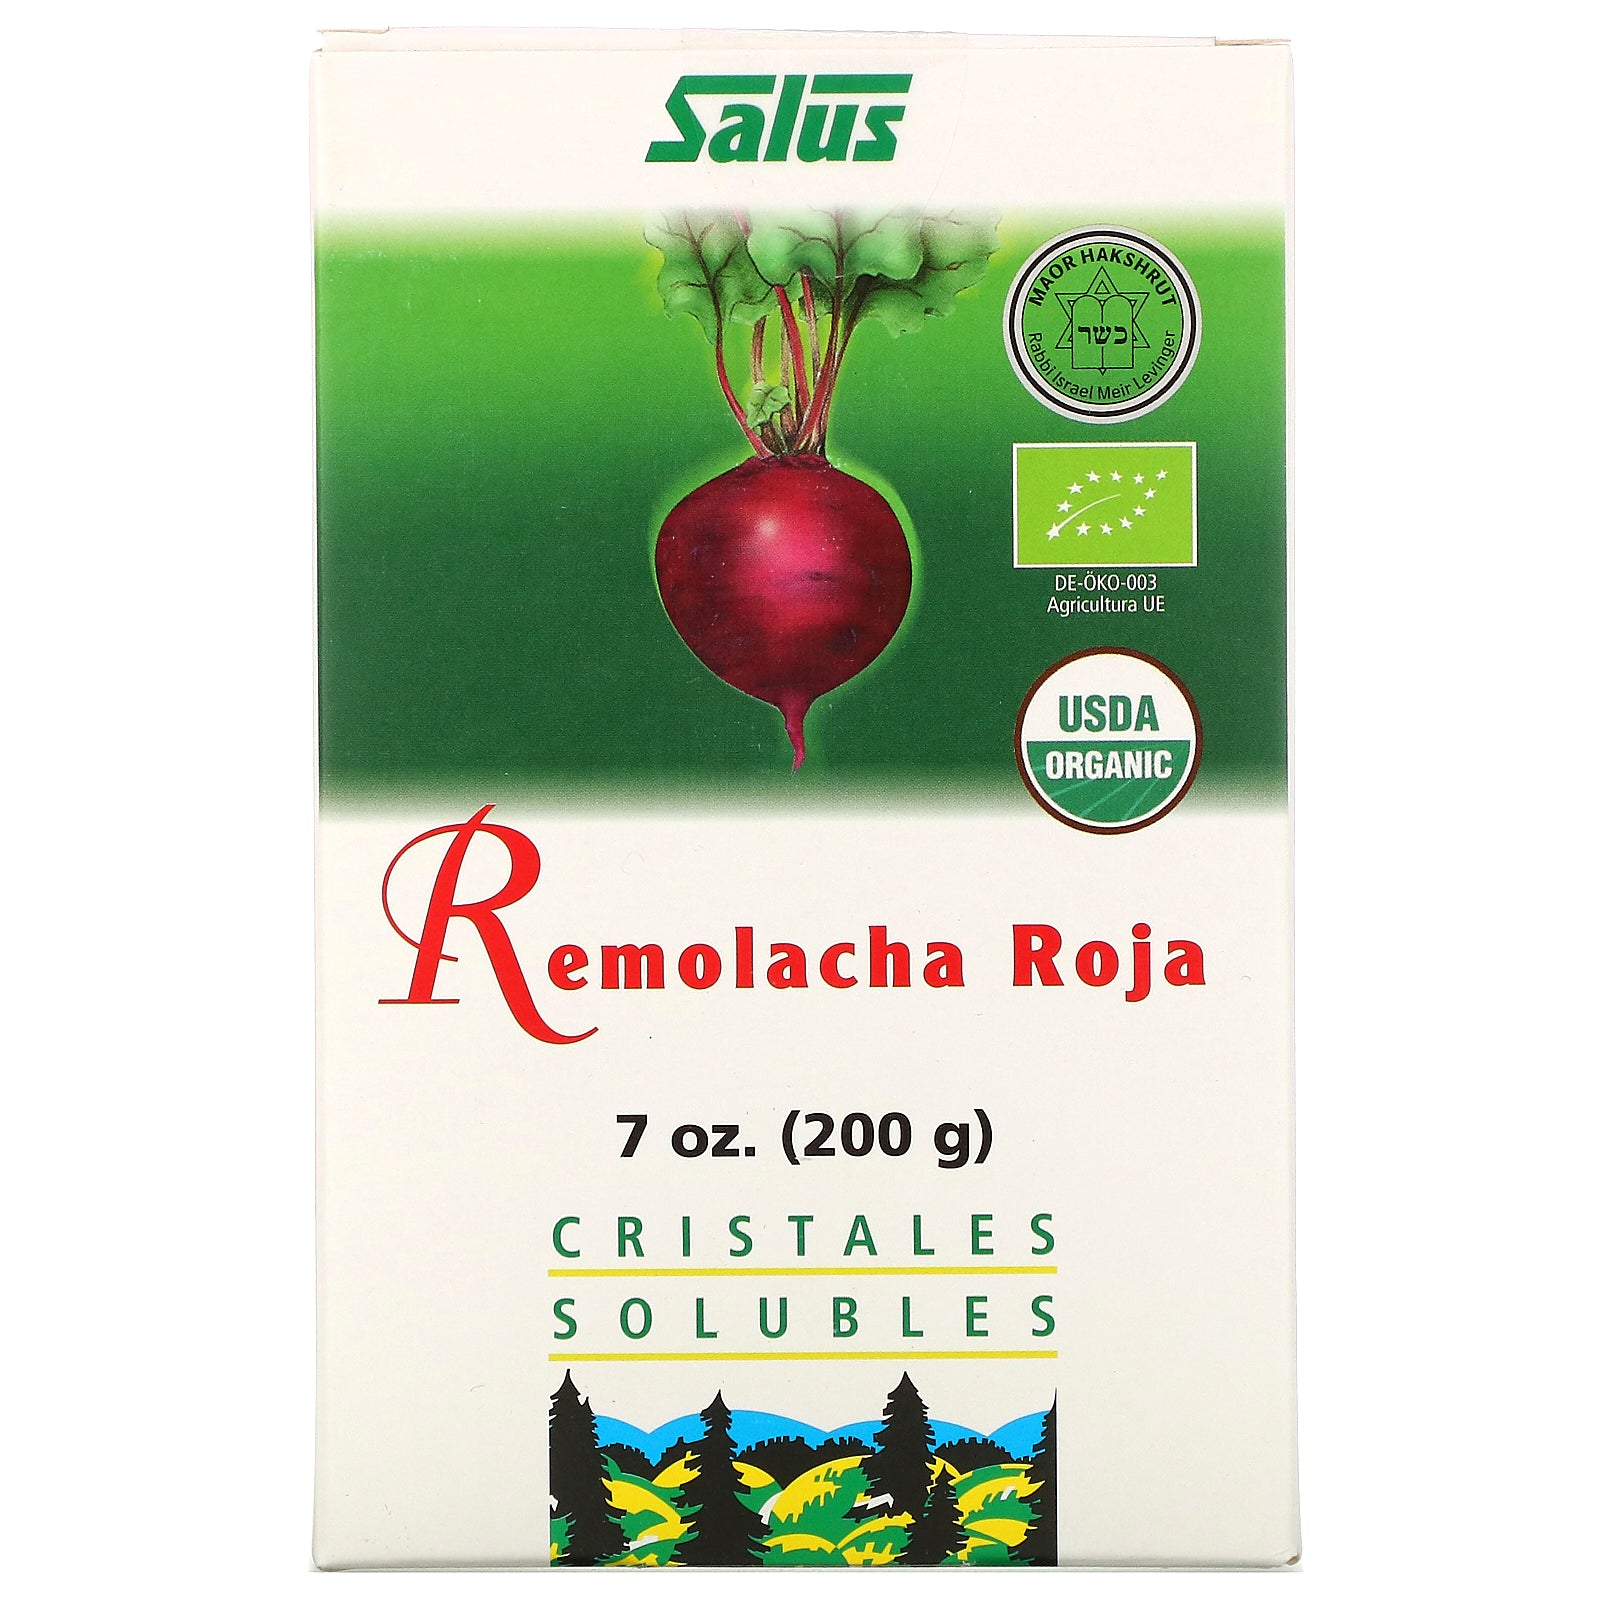 Flora, Red Beet, Soluble Crystals, 7 oz (200 g)